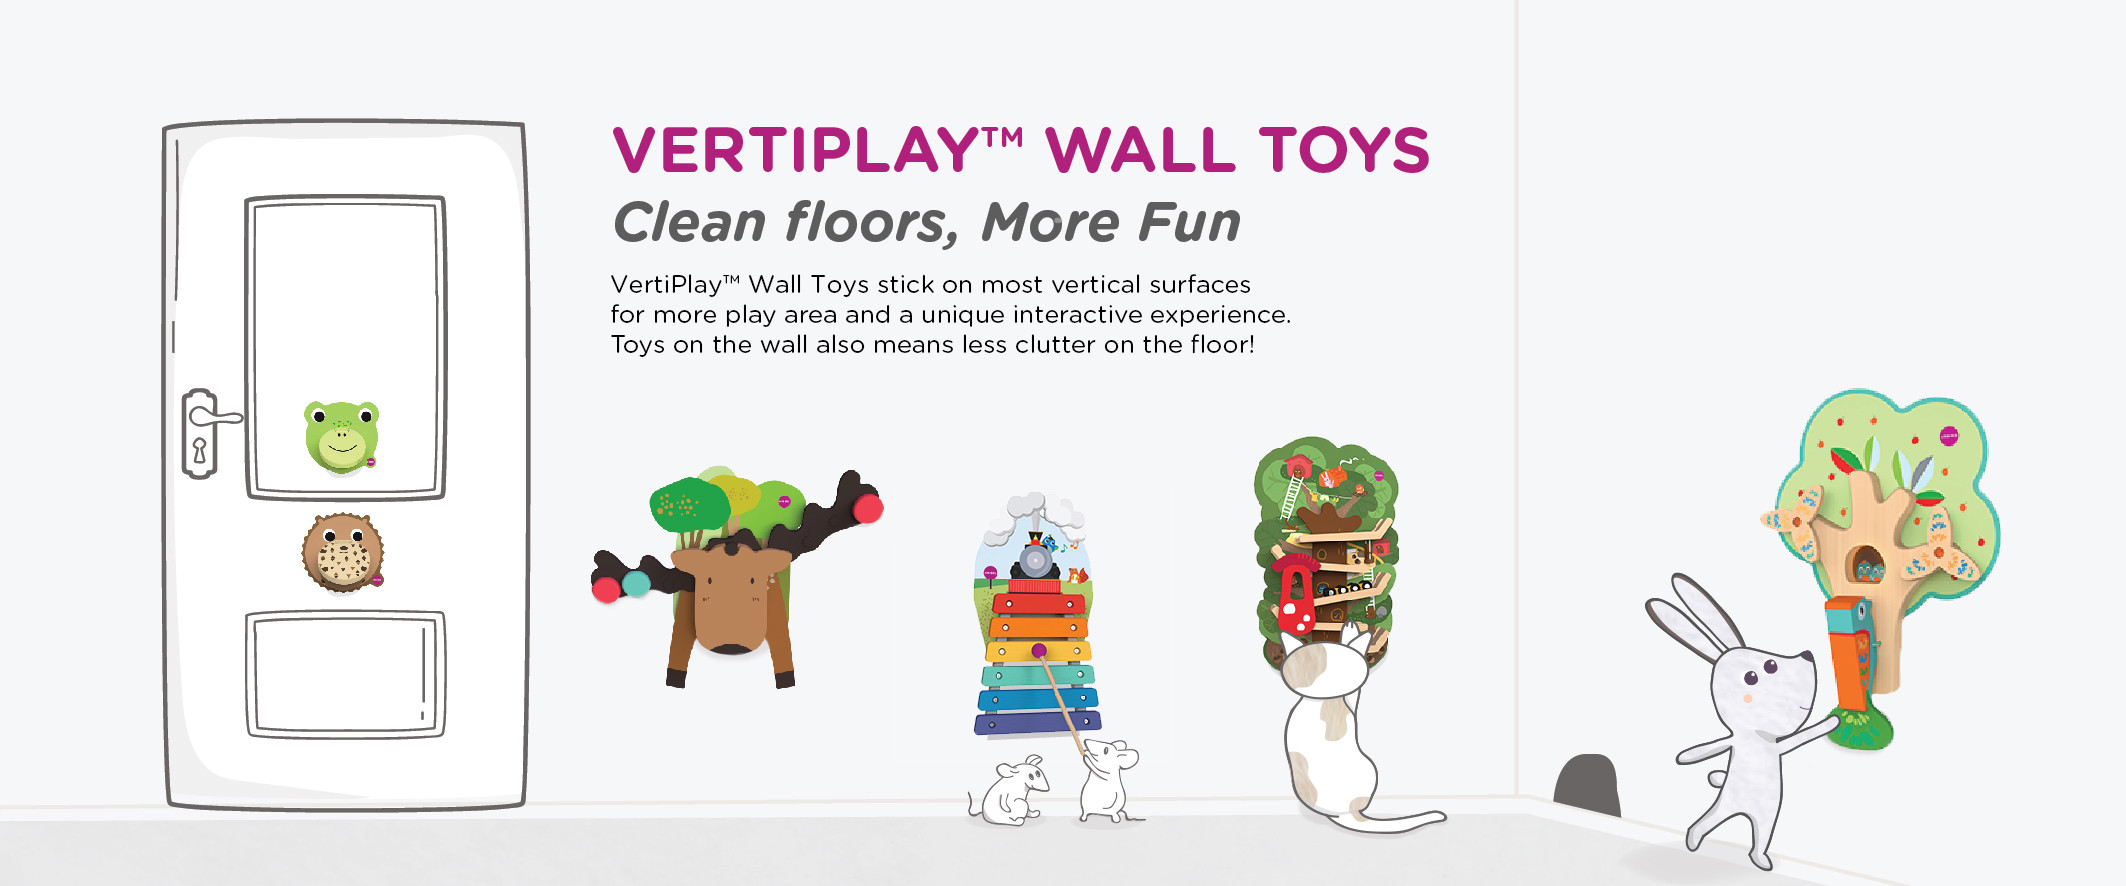 Great Christmas Gift for Toddlers! #Fun #Holidays #Ad # ToddlerLife #LoveOribel